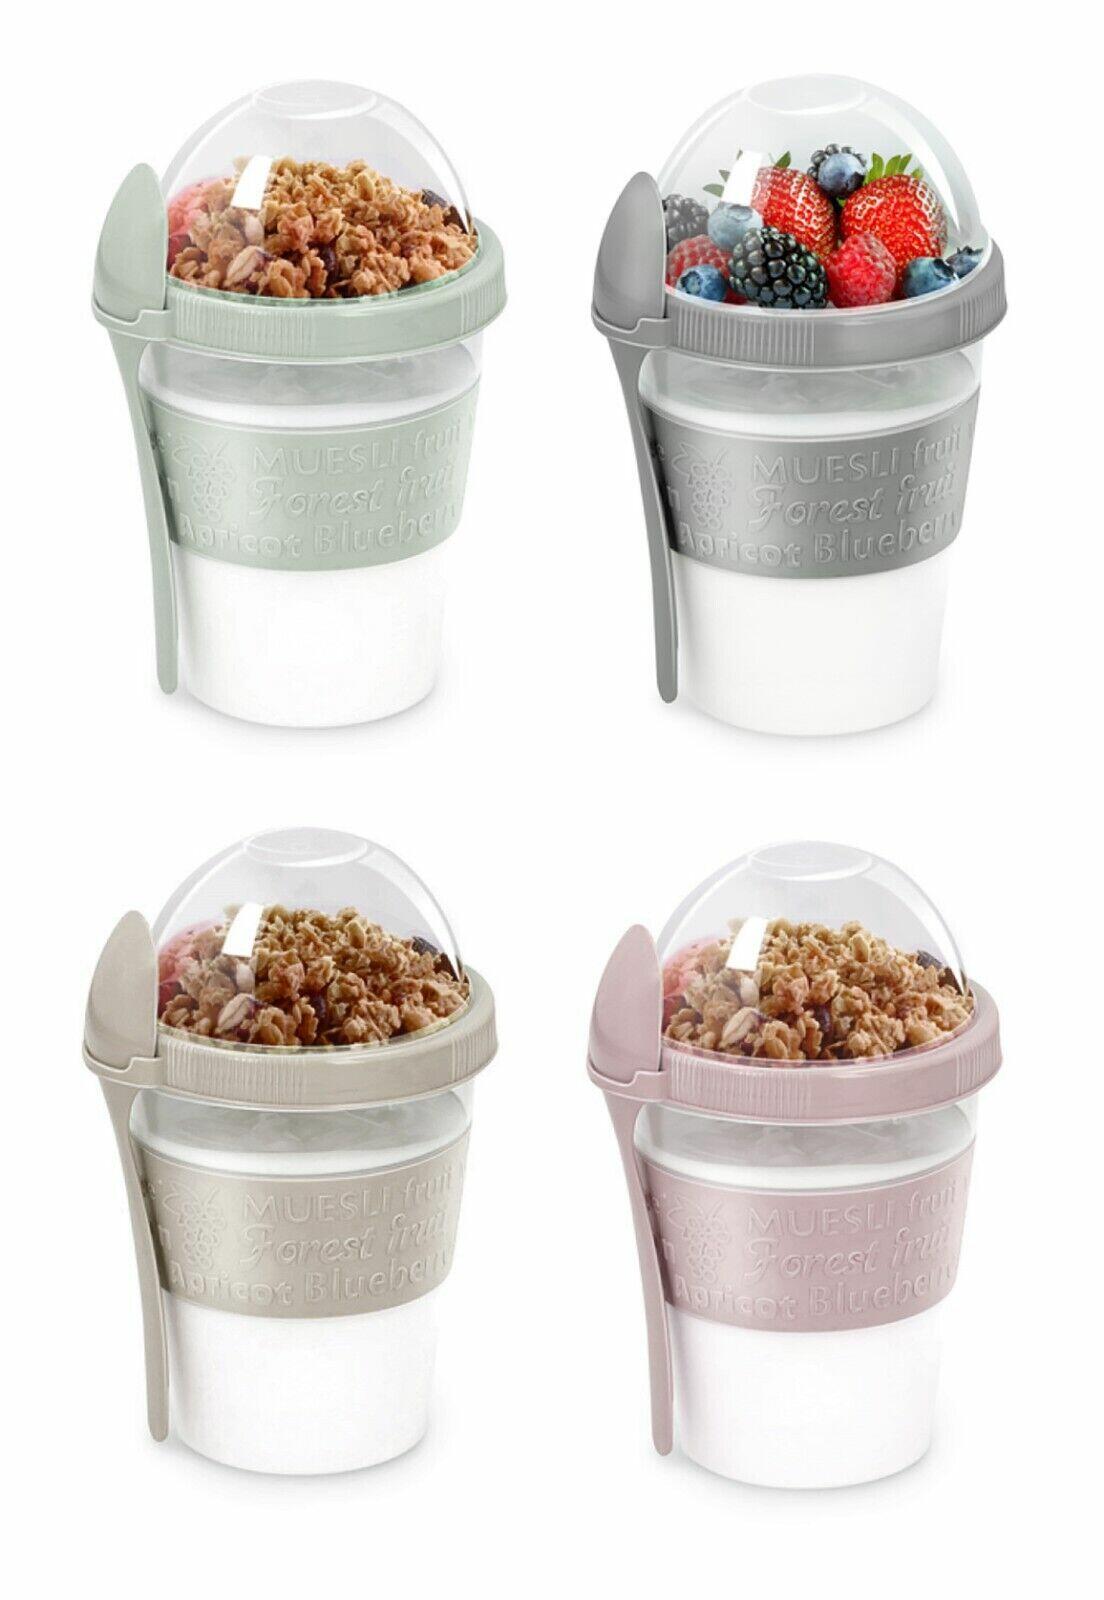 Cereal Container, Muesli Container Storage, Container with Lid for Yogurt,  Snack, Fruit, Custard, Reusable Snack Cup with Lid, Cereal On the Go Cup,  Meal Prep Container, 15 oz 